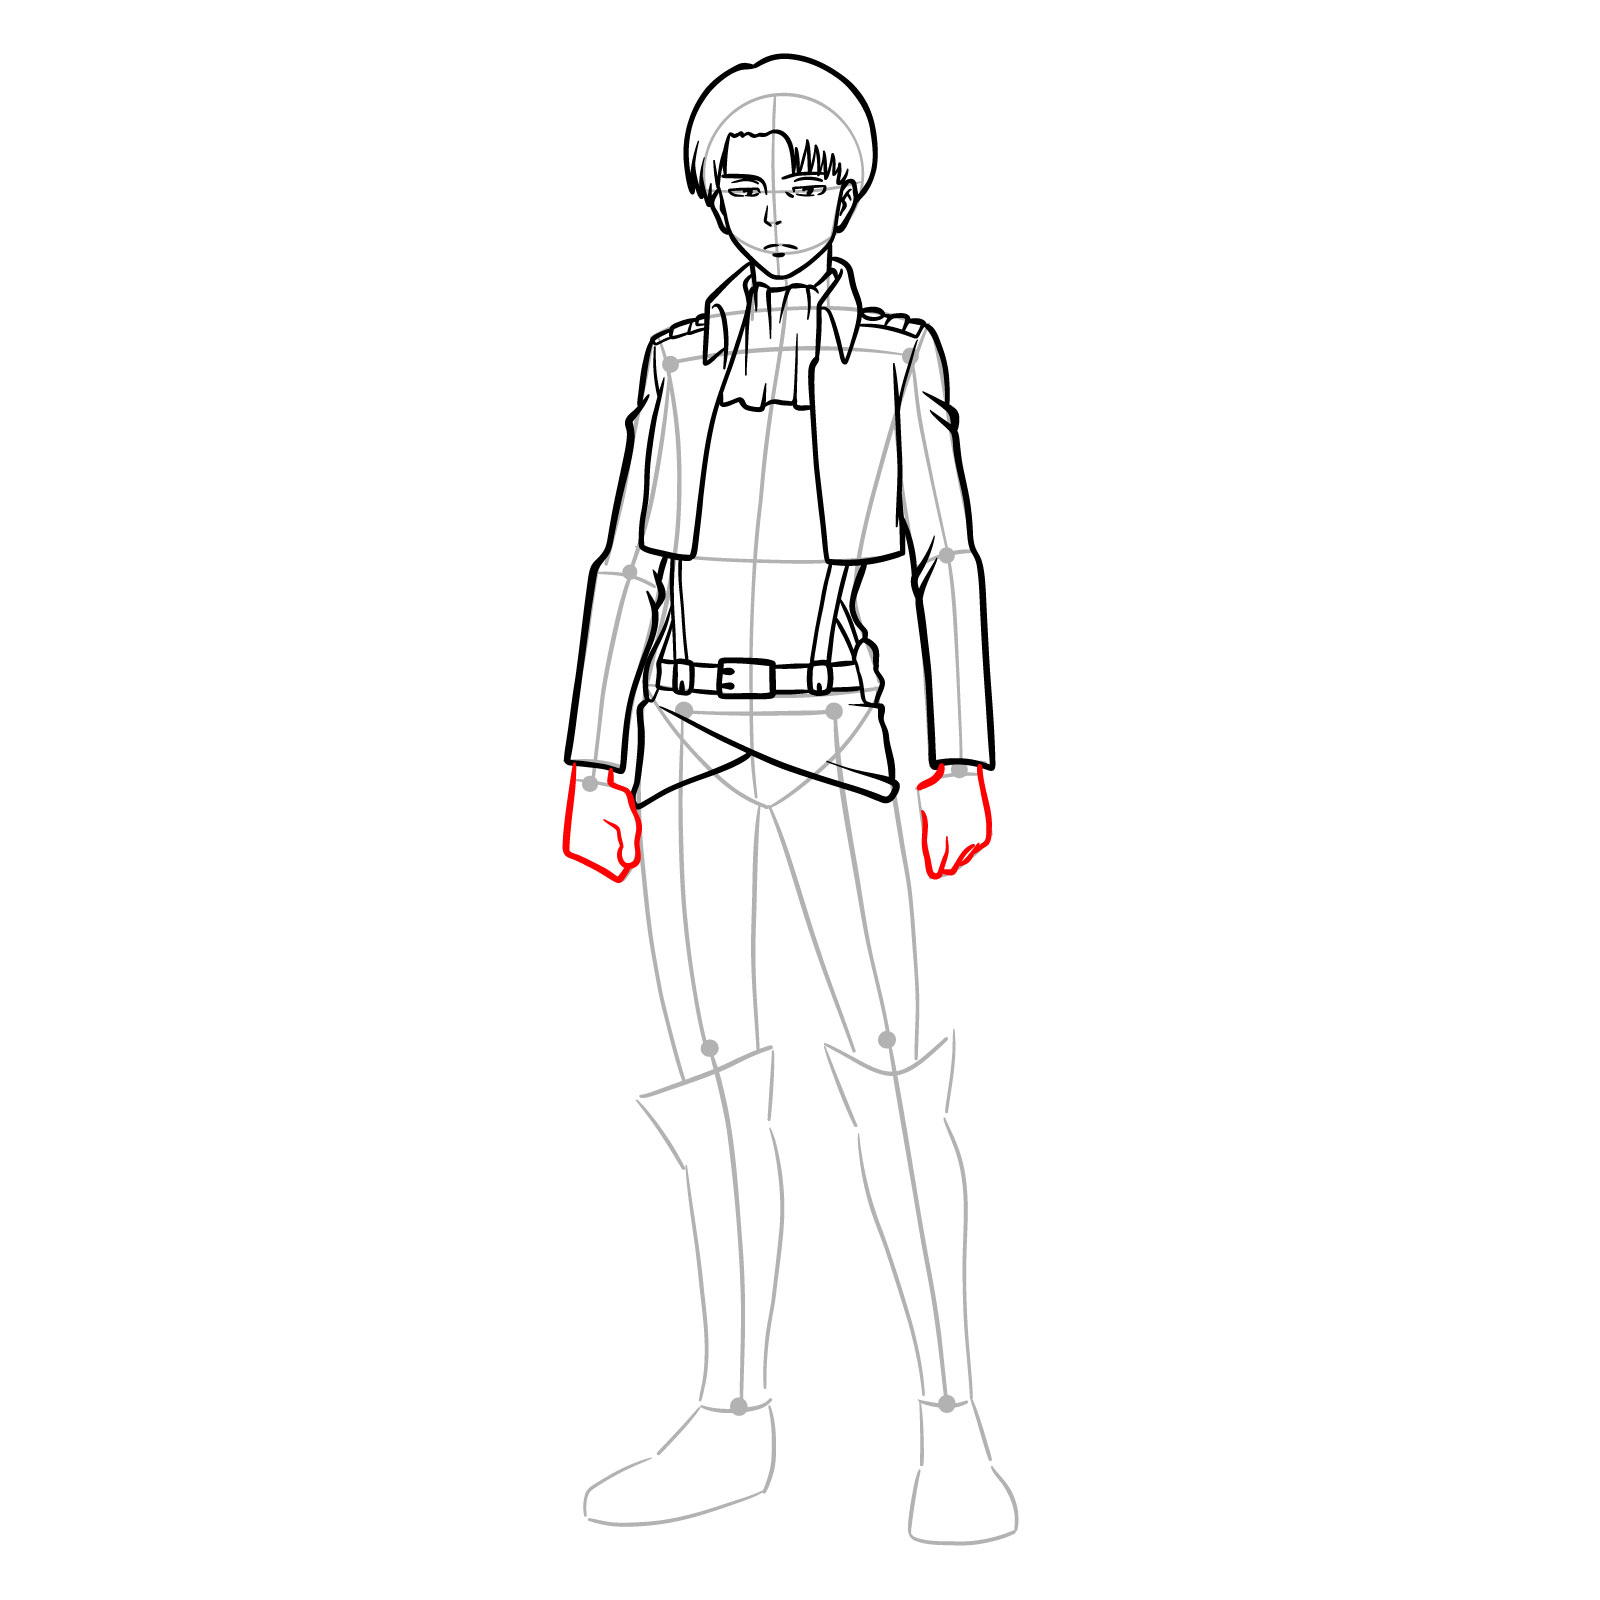 Levi full body drawing tutorial focusing on shaping hands - step 17